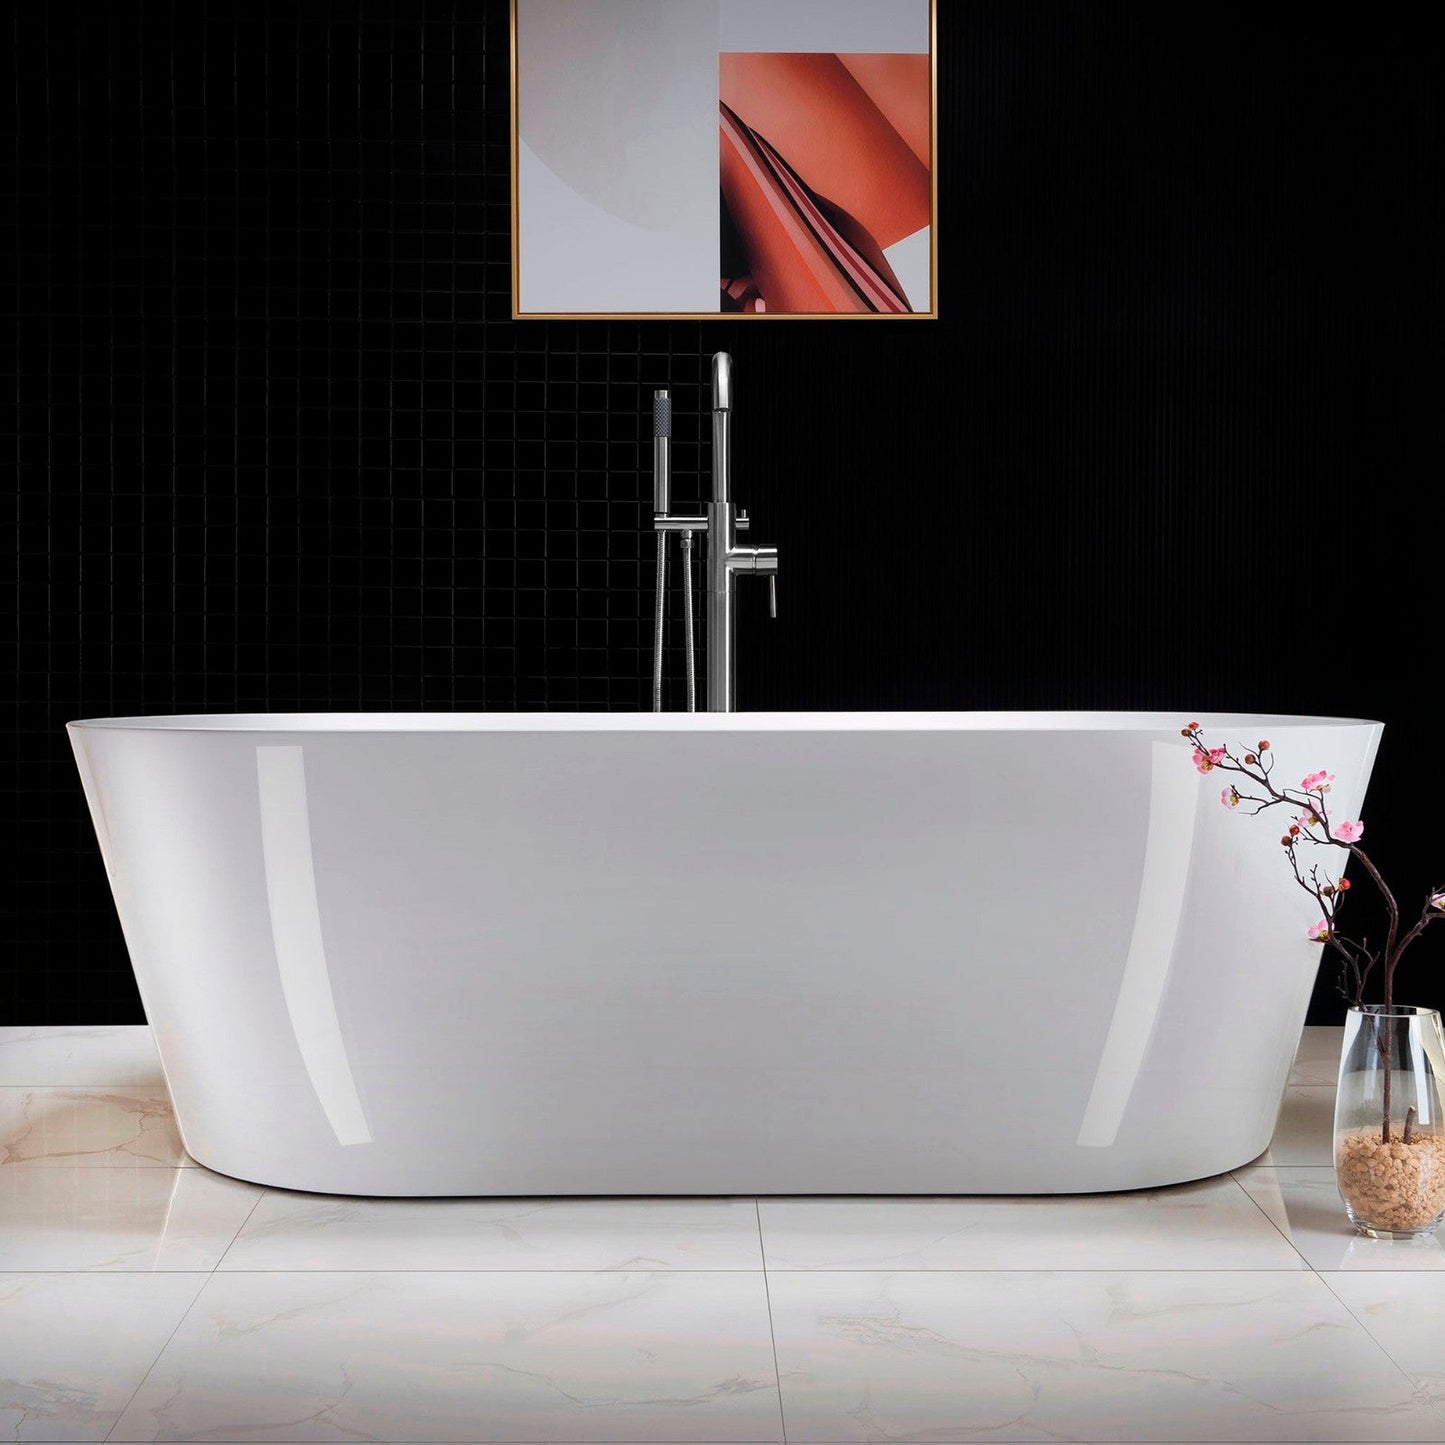 WoodBridge 71" White Acrylic Freestanding Contemporary Soaking Bathtub With Chrome Drain, Overflow, F-0004 Tub Filler and Caddy Tray